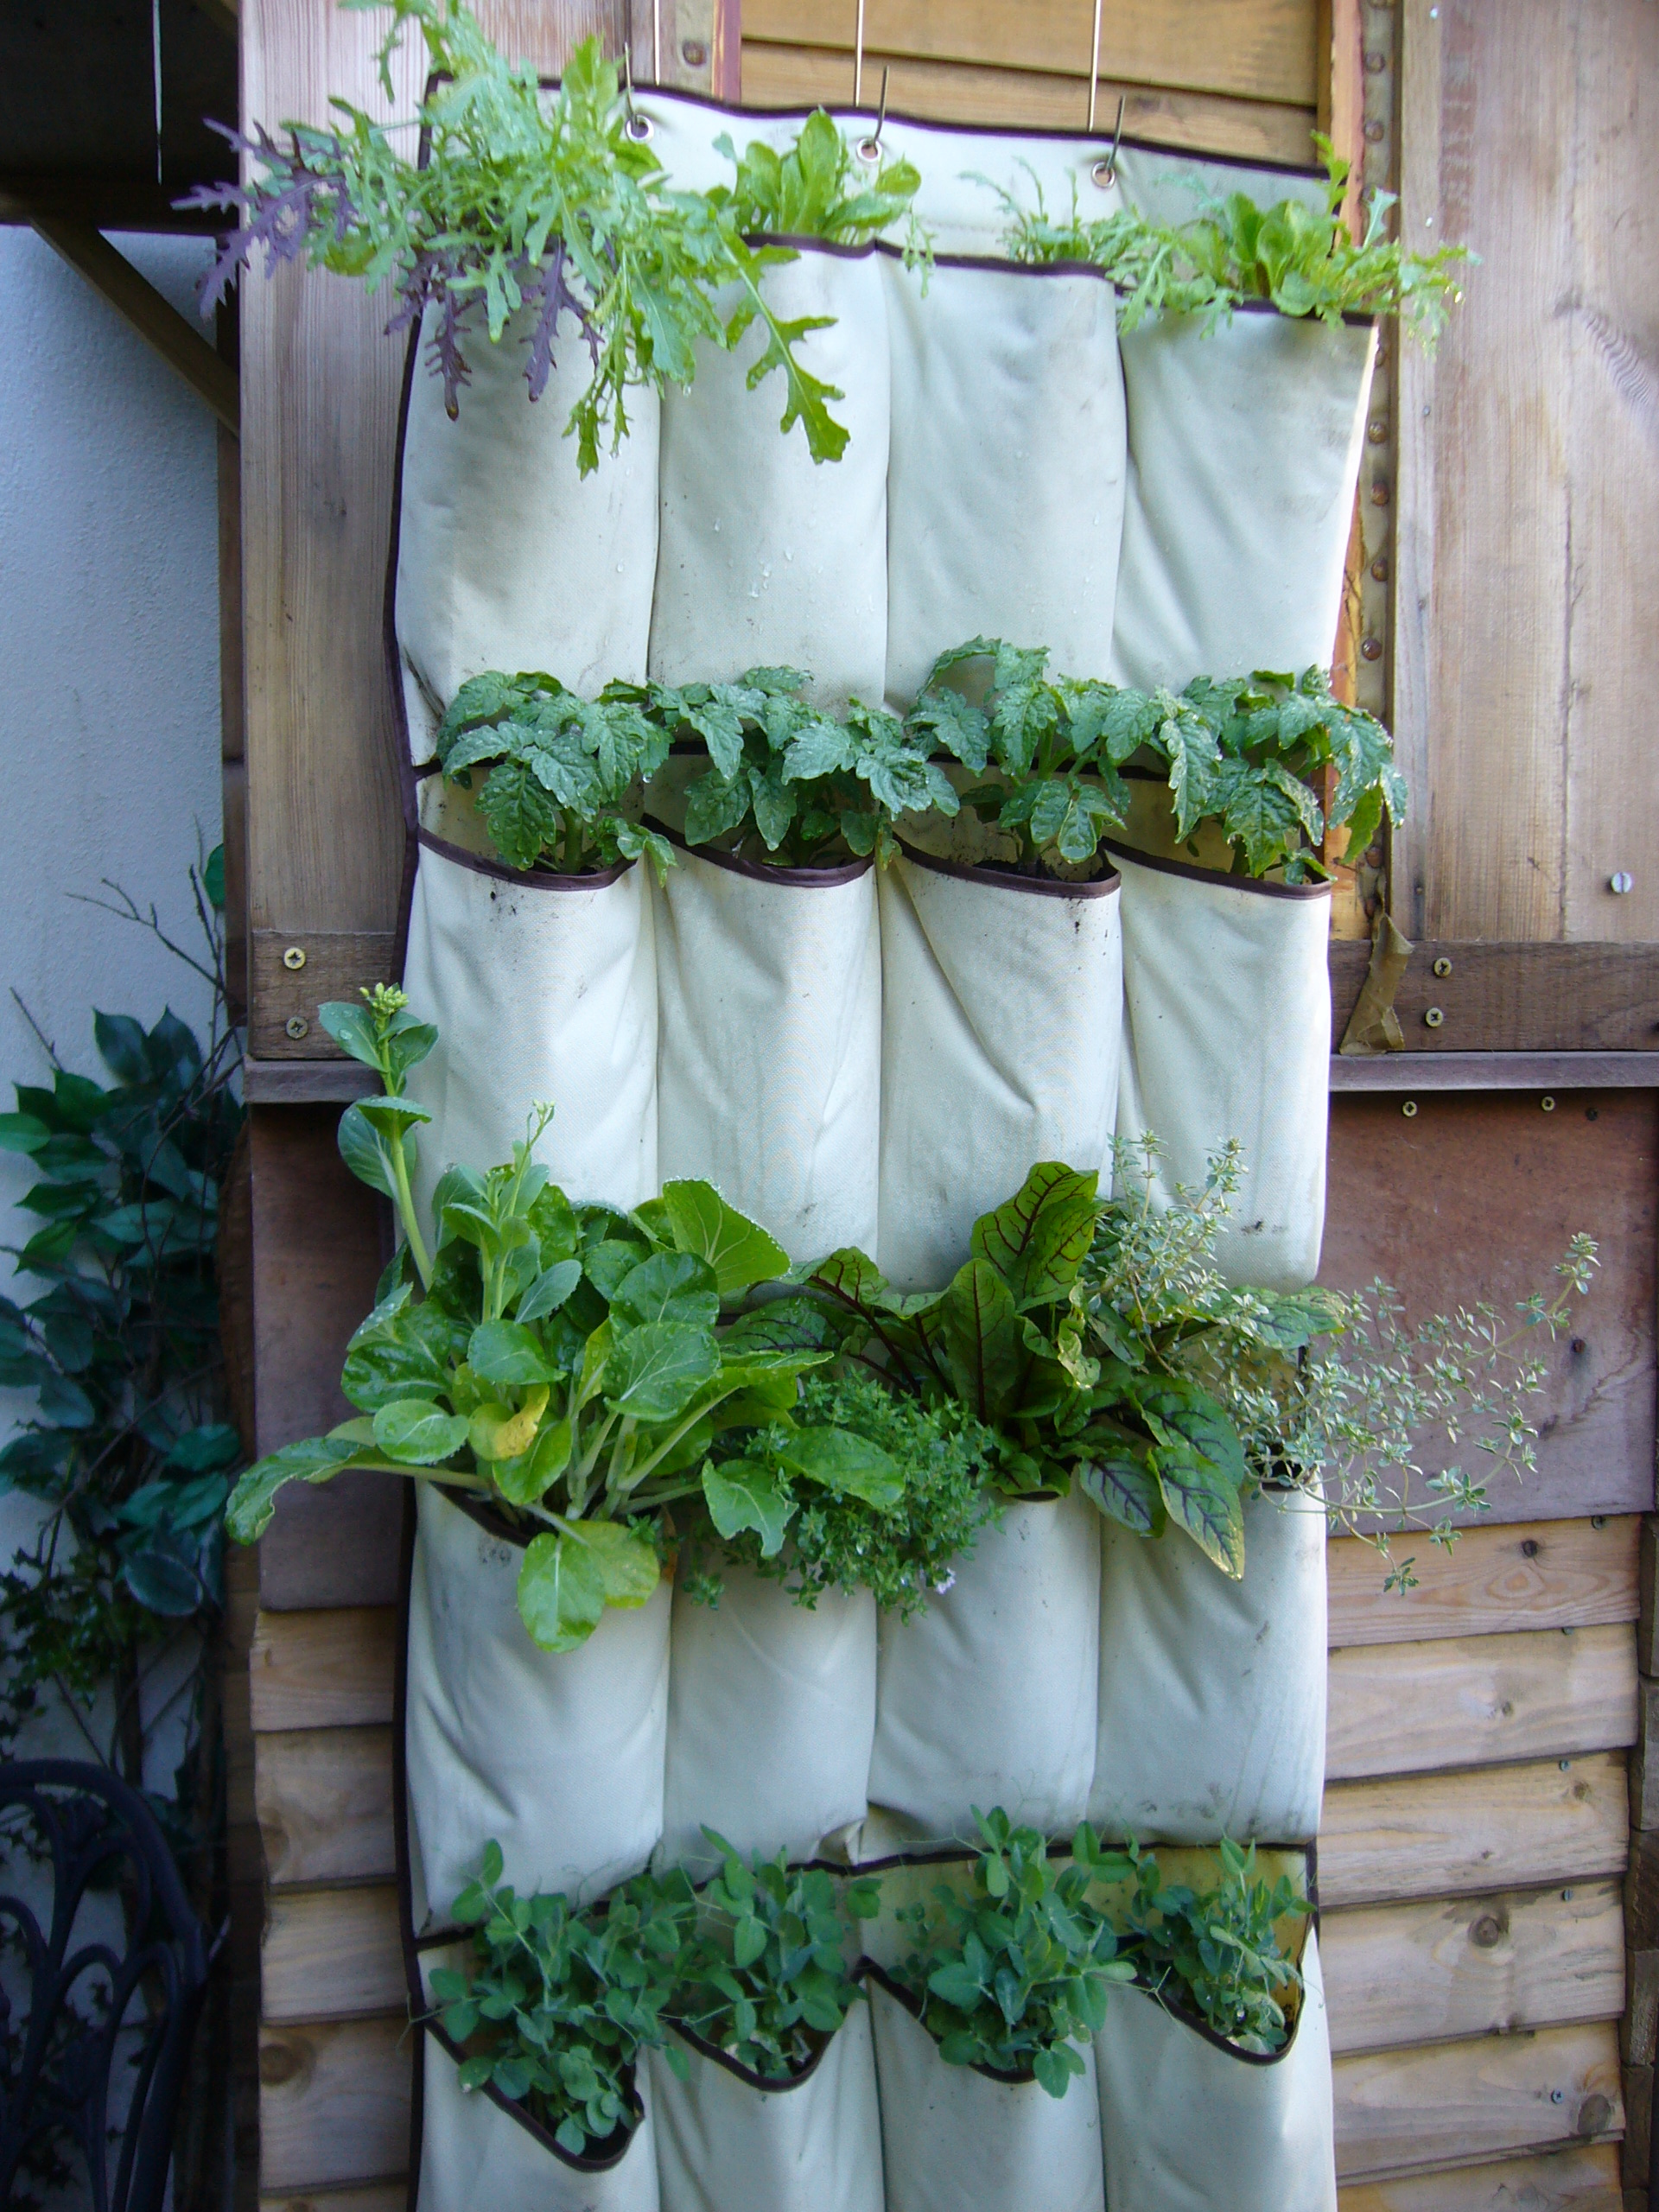 VERTICAL VEGETABLES: "Grow up" in a small garden and confound the cats!